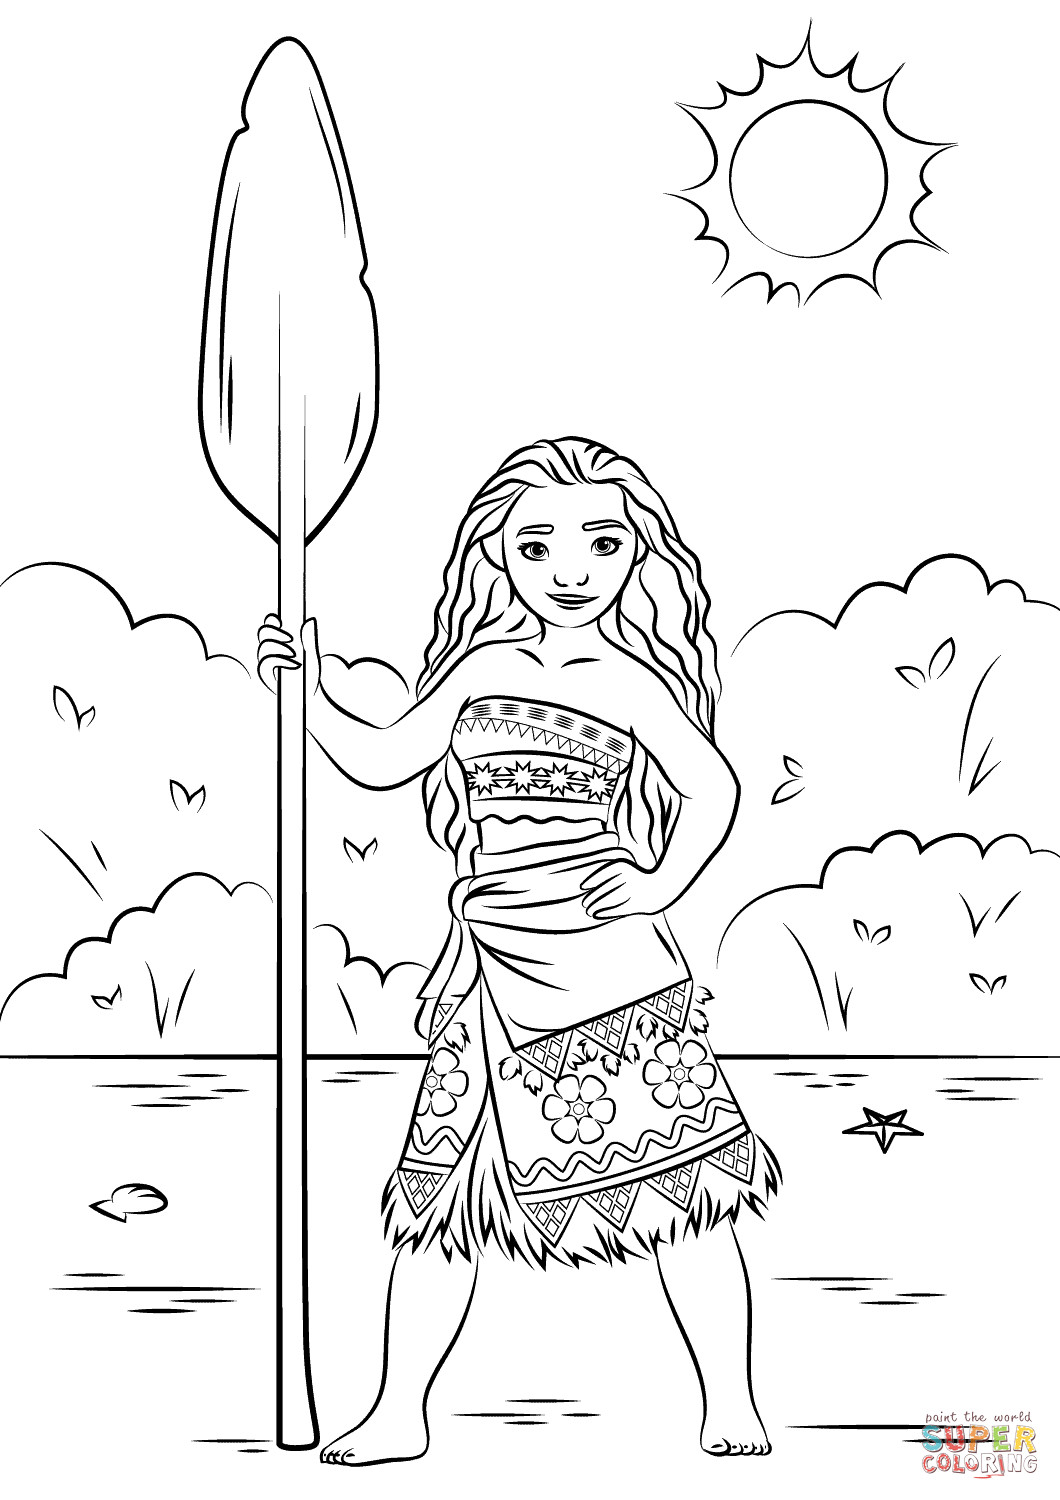 25 Of the Best Ideas for Kids Coloring Pages Moana - Home, Family